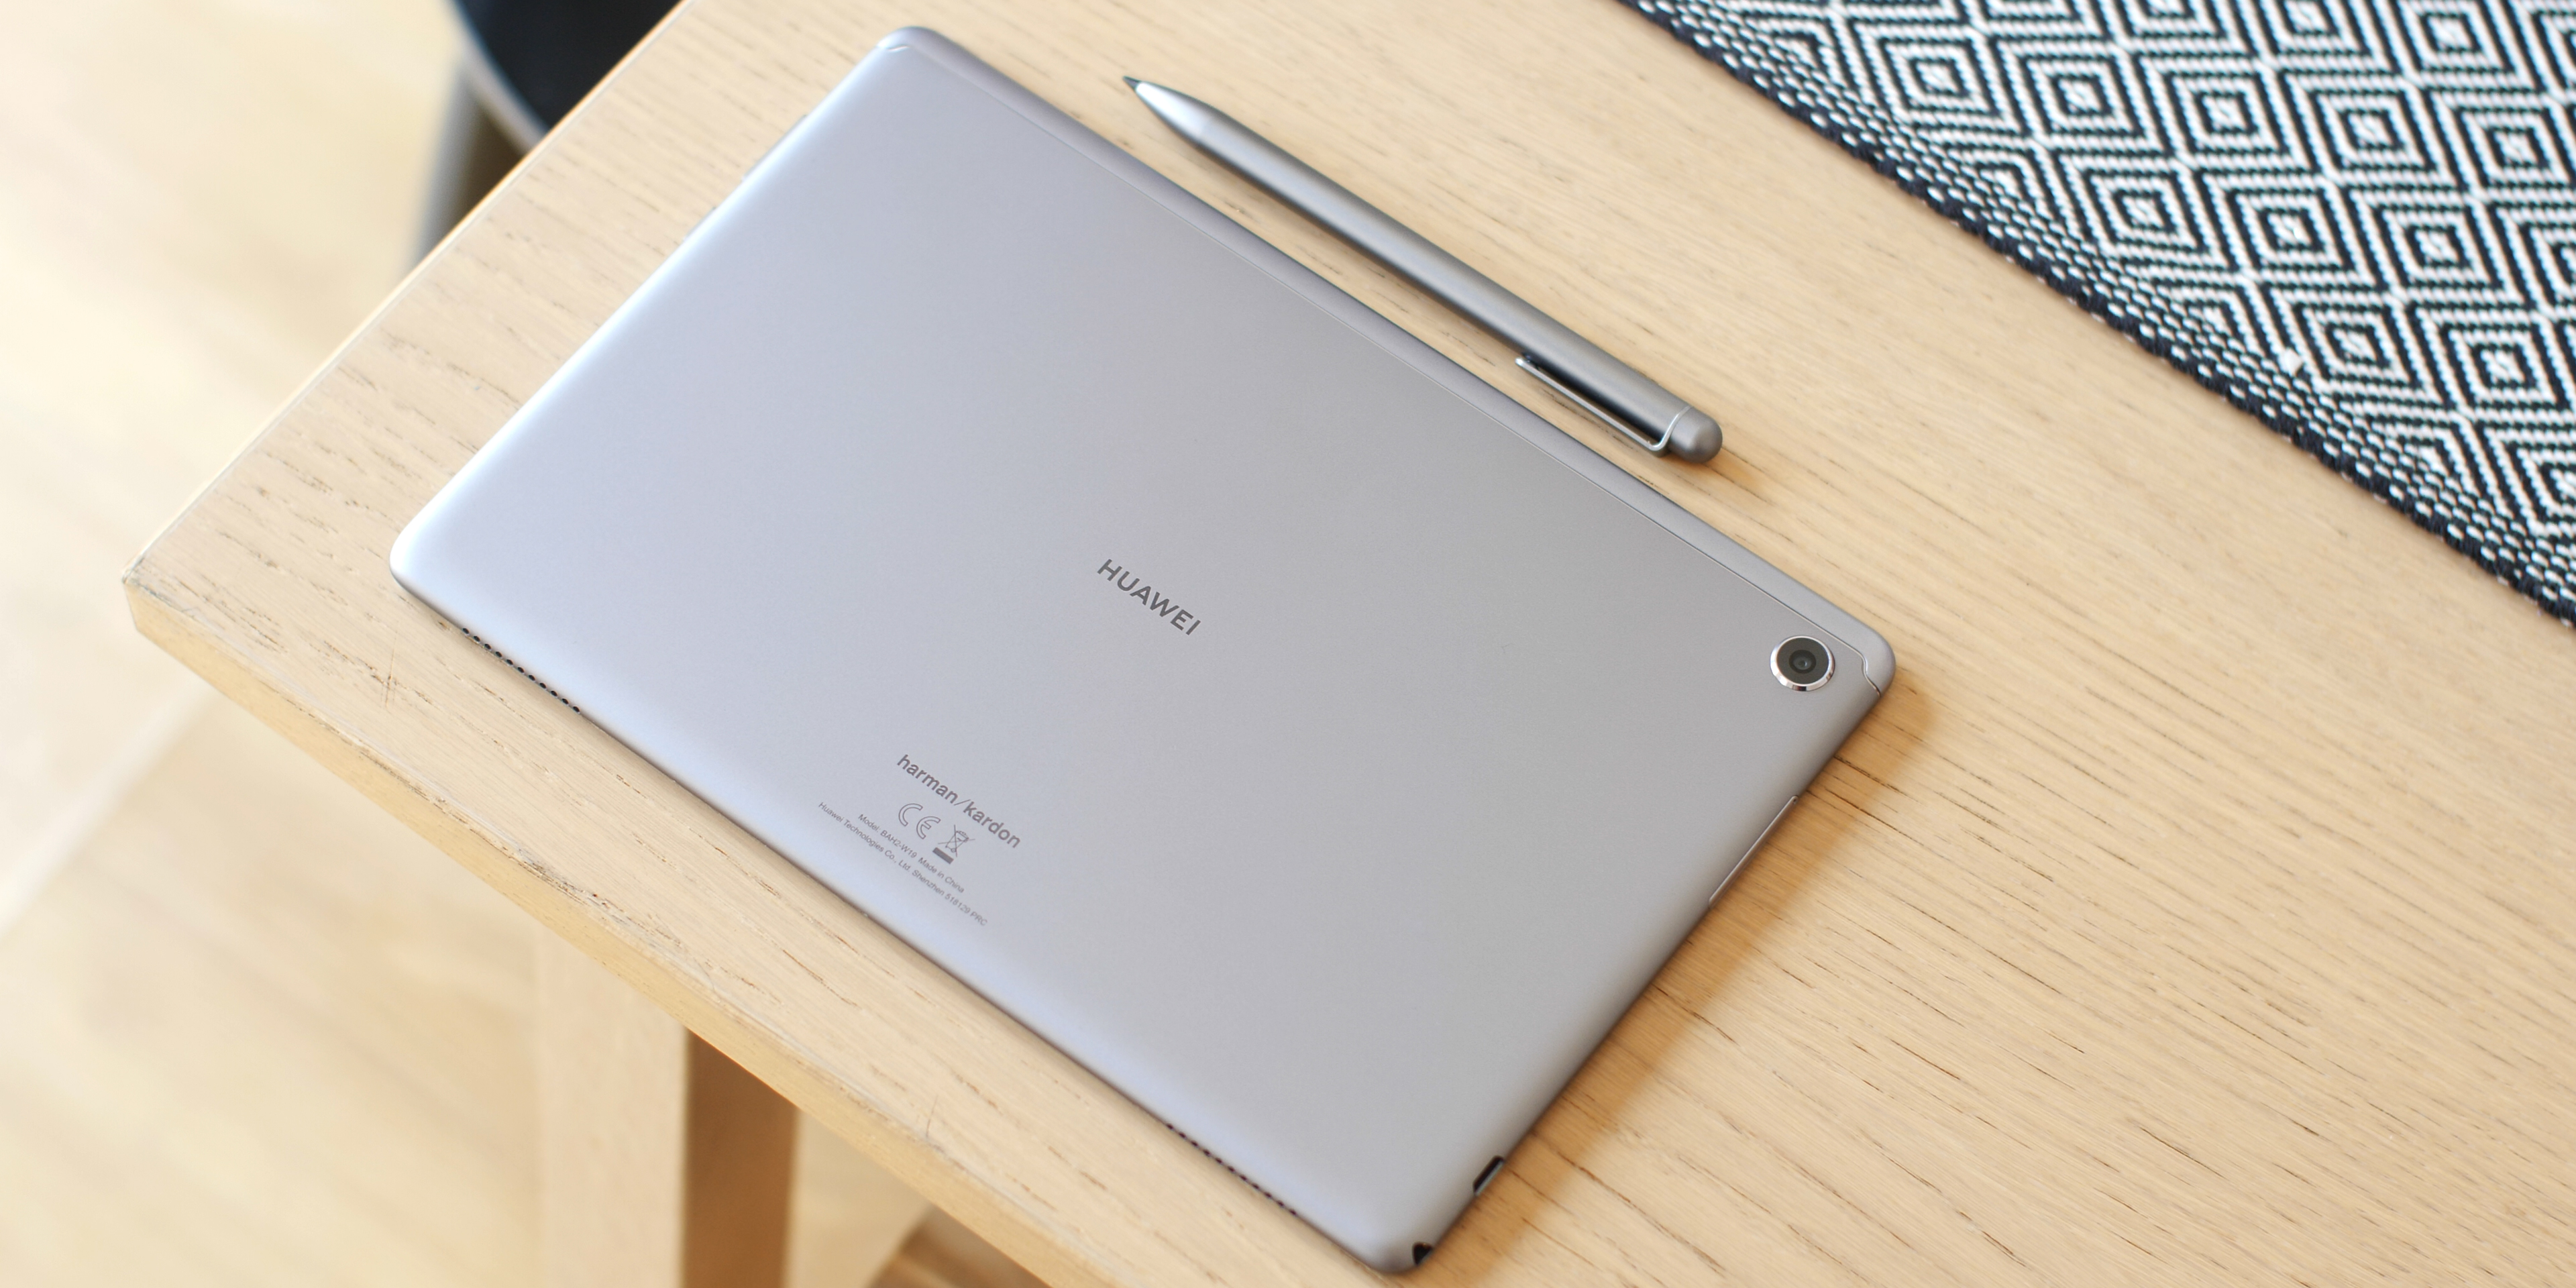 Huawei MediaPad M5 Lite A decent Android tablet 9to5Google